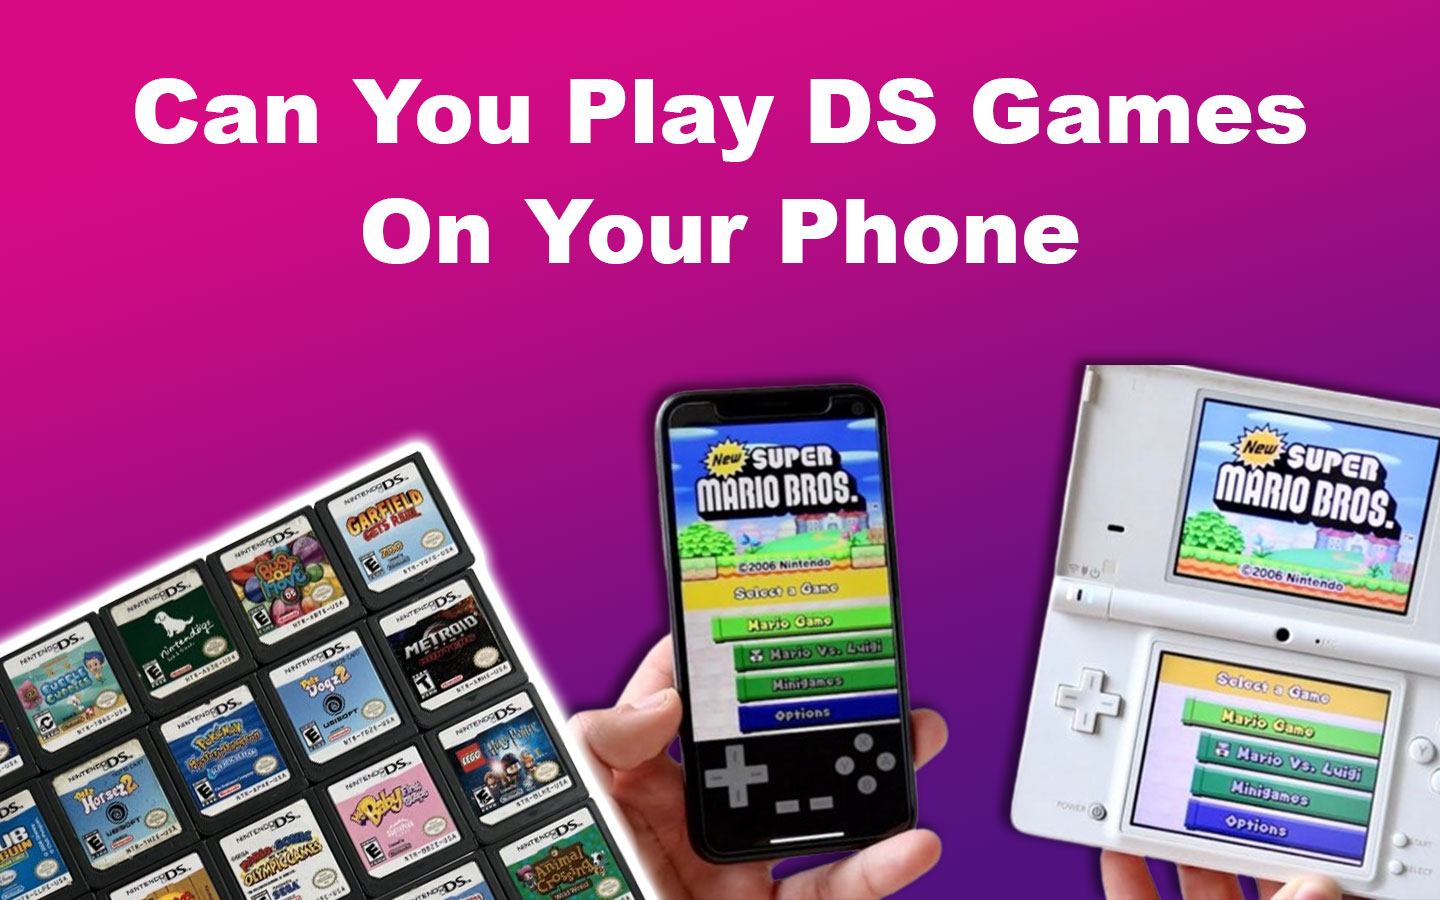 Can You Play DS Games On Your Phone